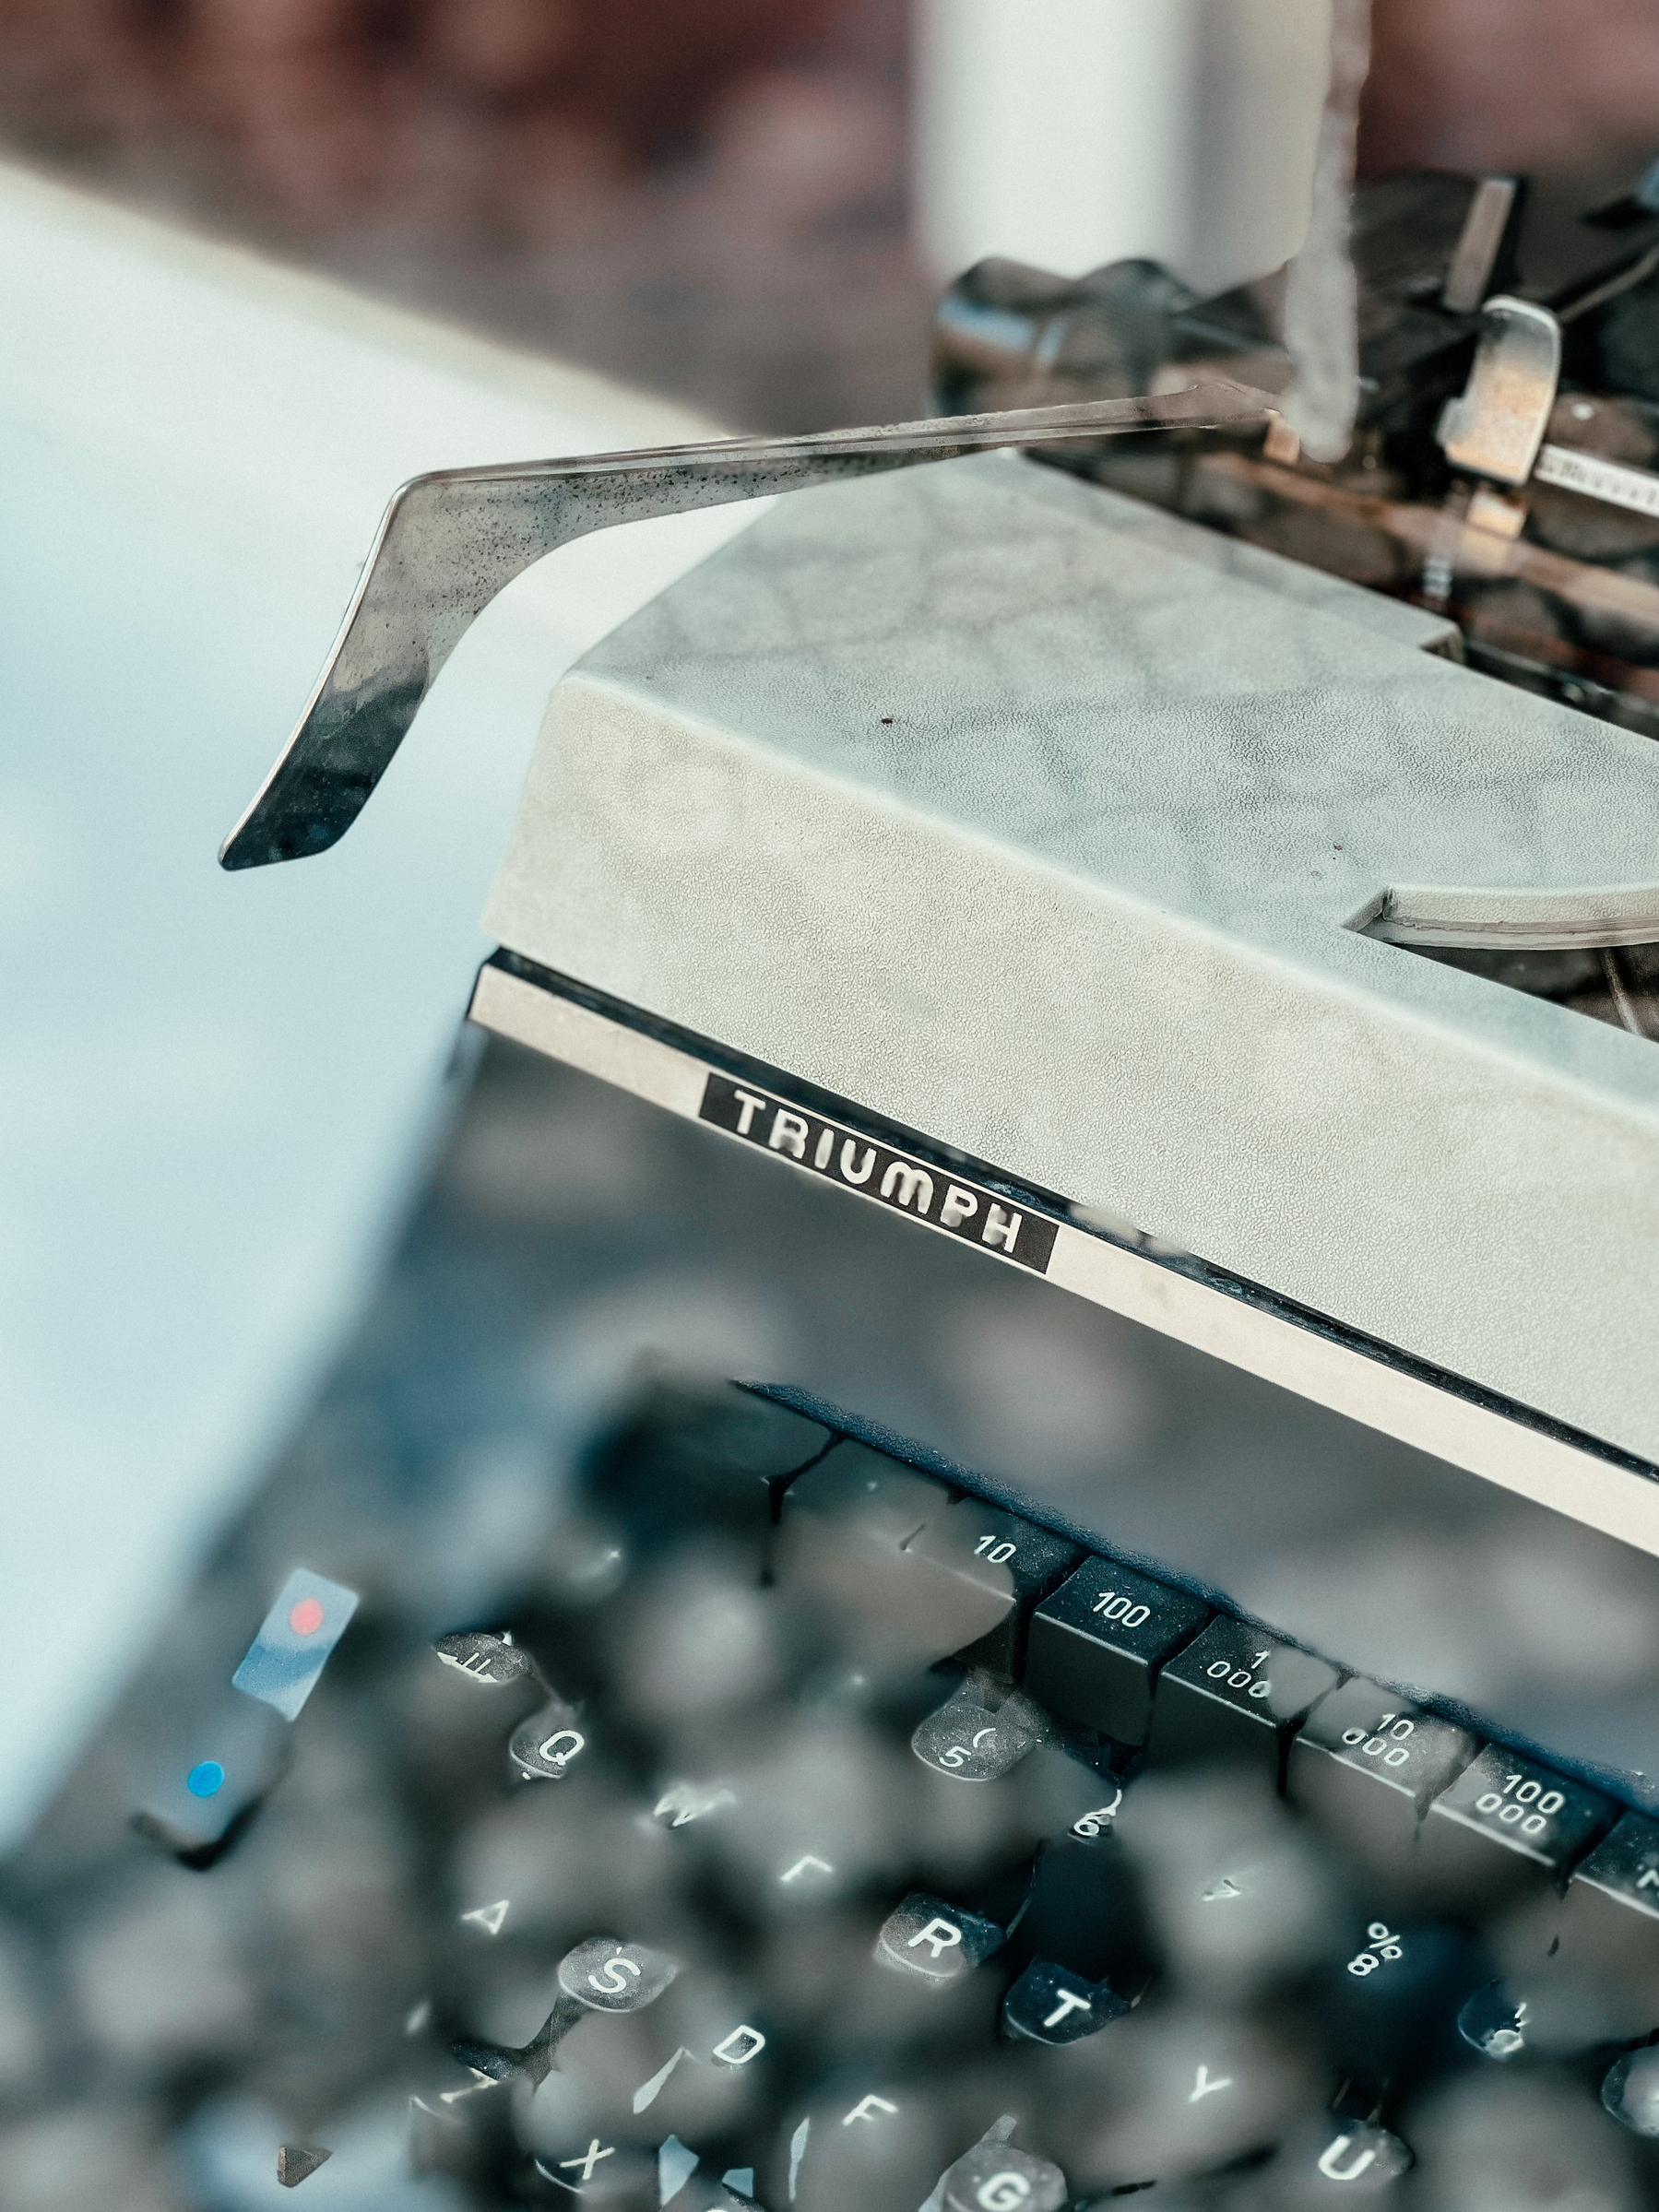 Detail of a typewriter, the word “Triumph” is visible. 